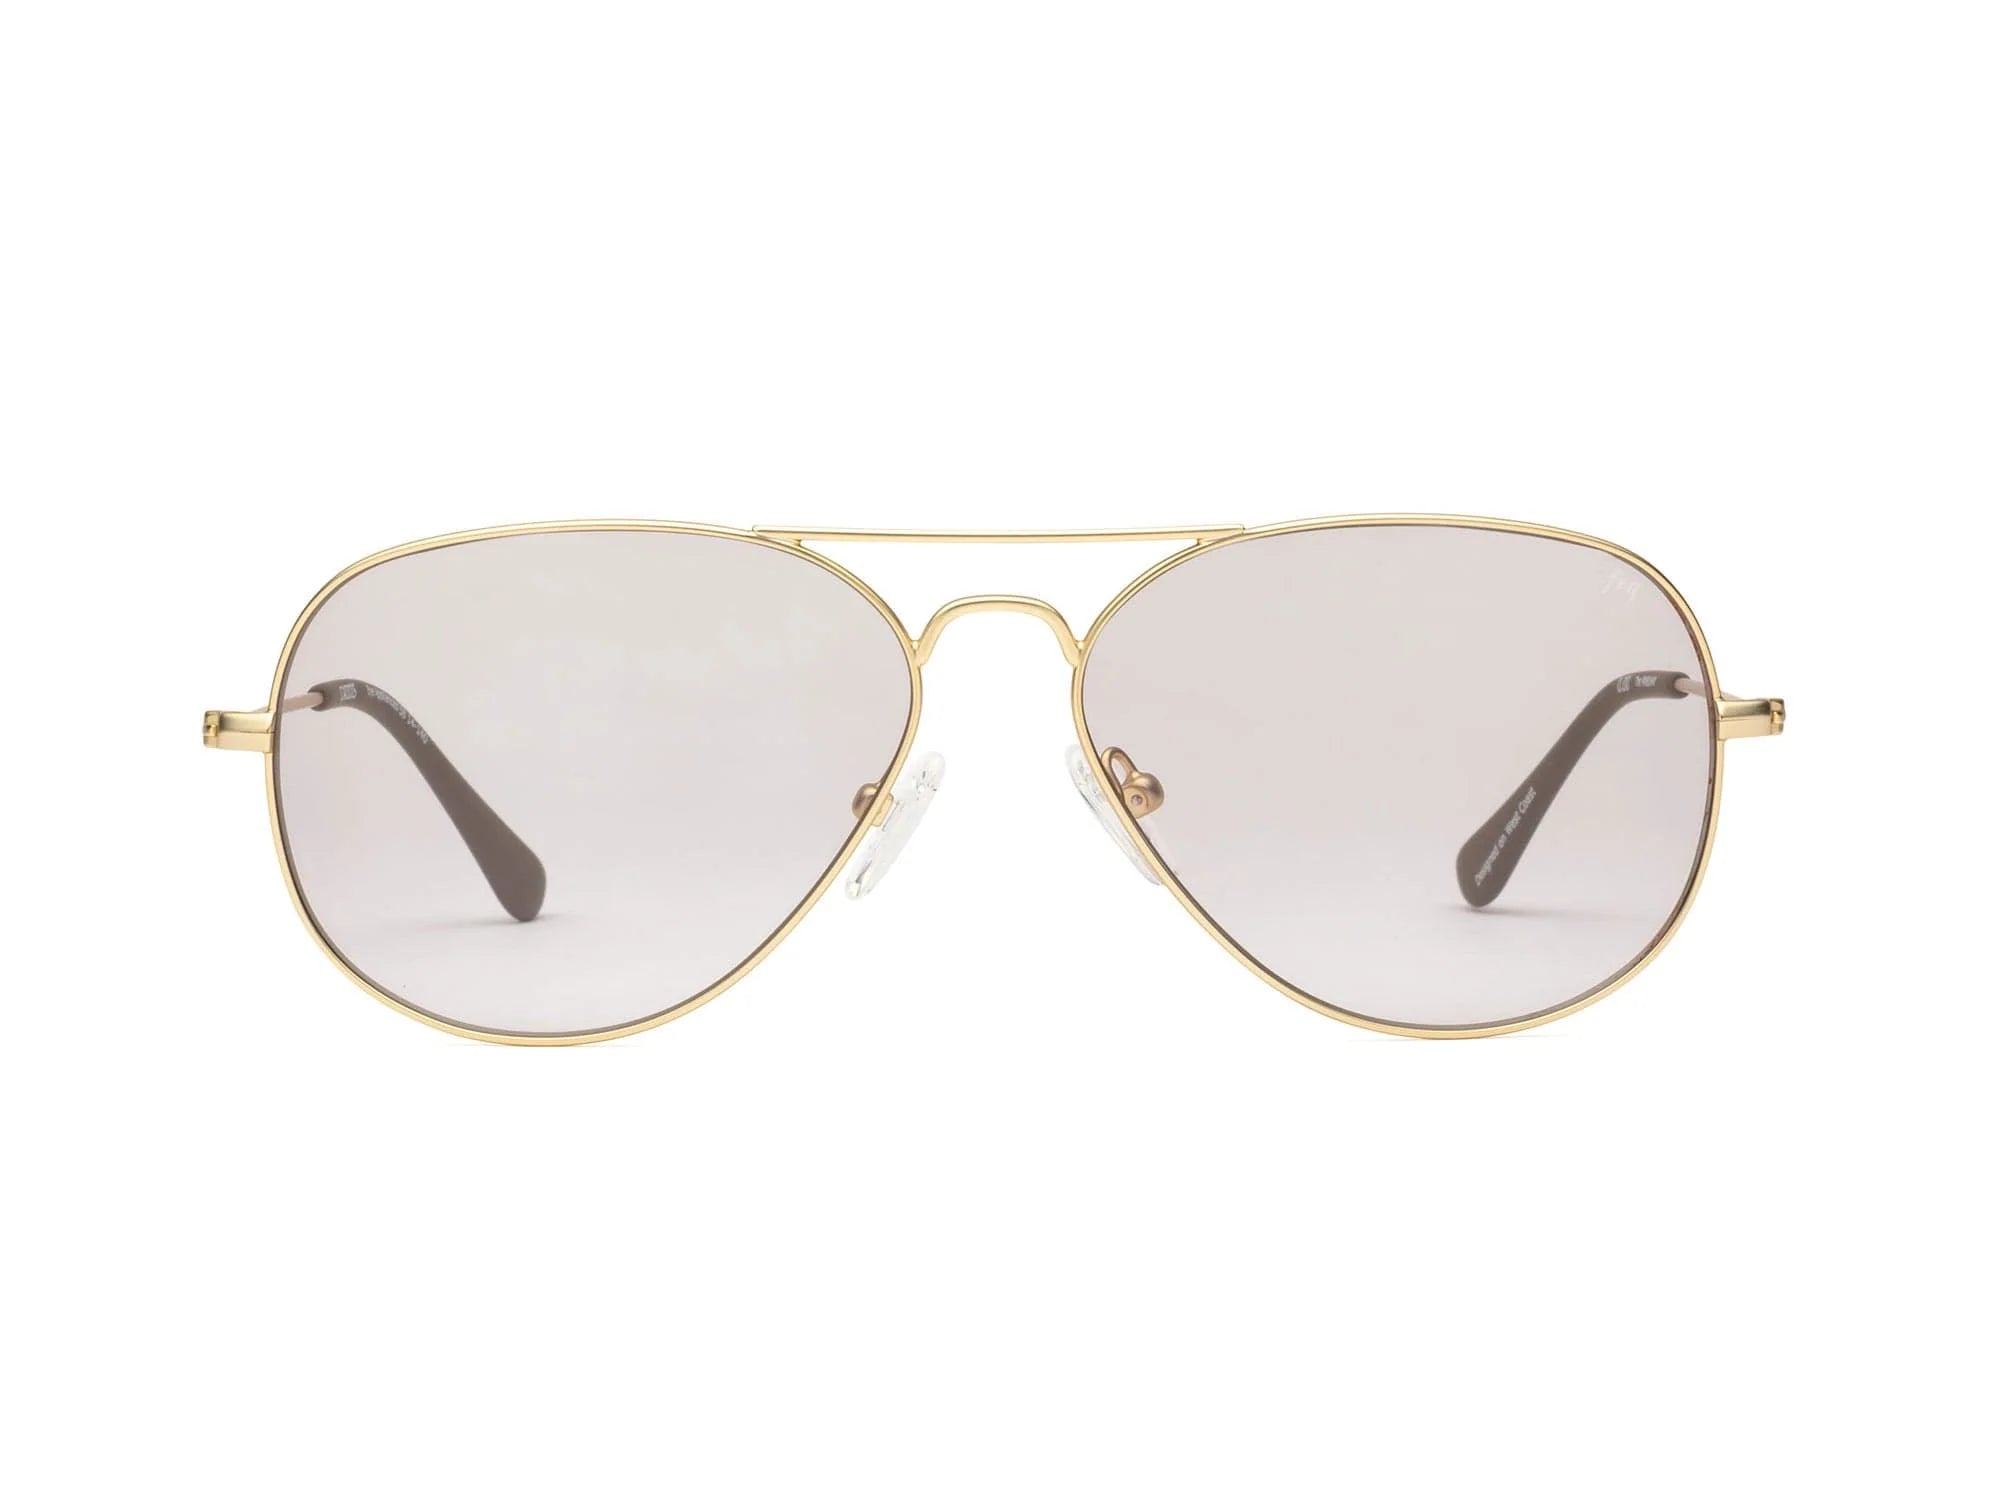 A pair of Mabuhay Matte Gold aviator sunglasses with gold frames and lightly tinted lenses, isolated on a white background by Caddis.